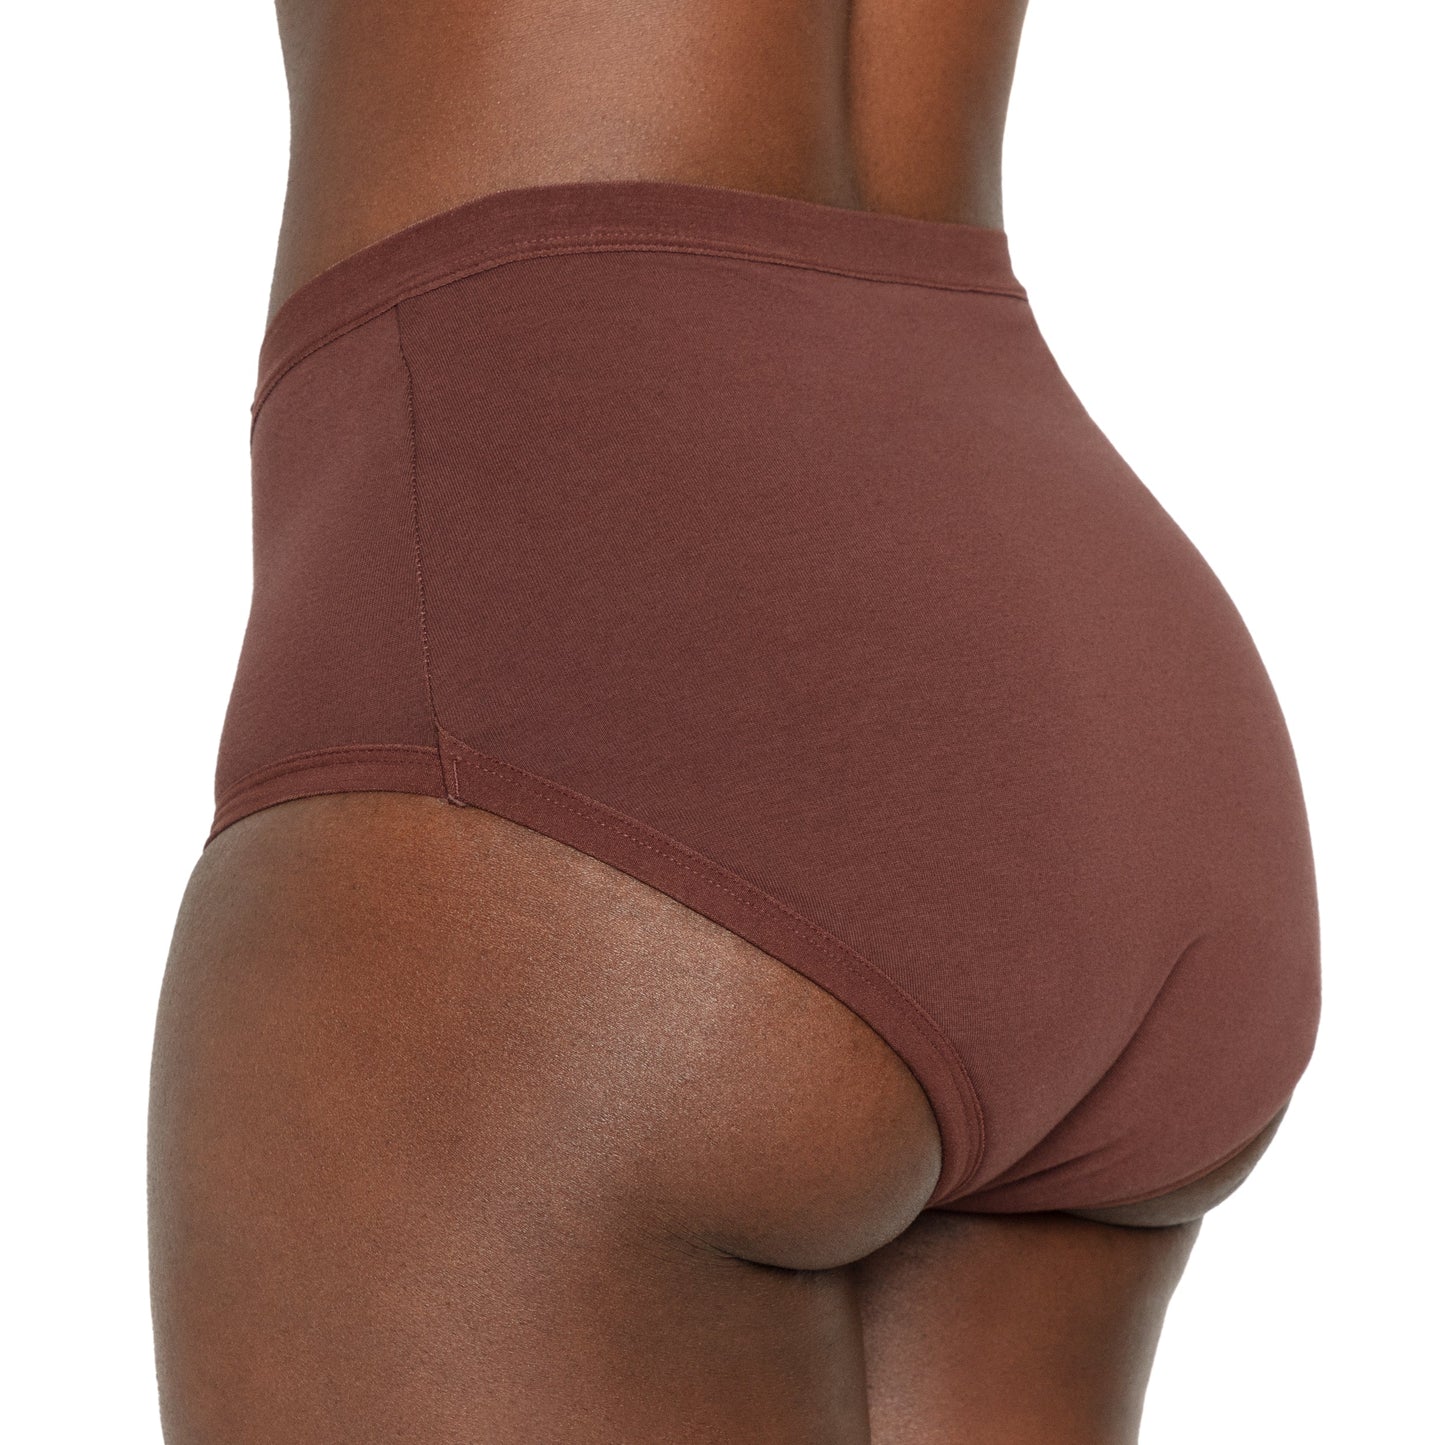 The High Waisted Period. in Organic Cotton For Heavy Flows. XS - 6XL